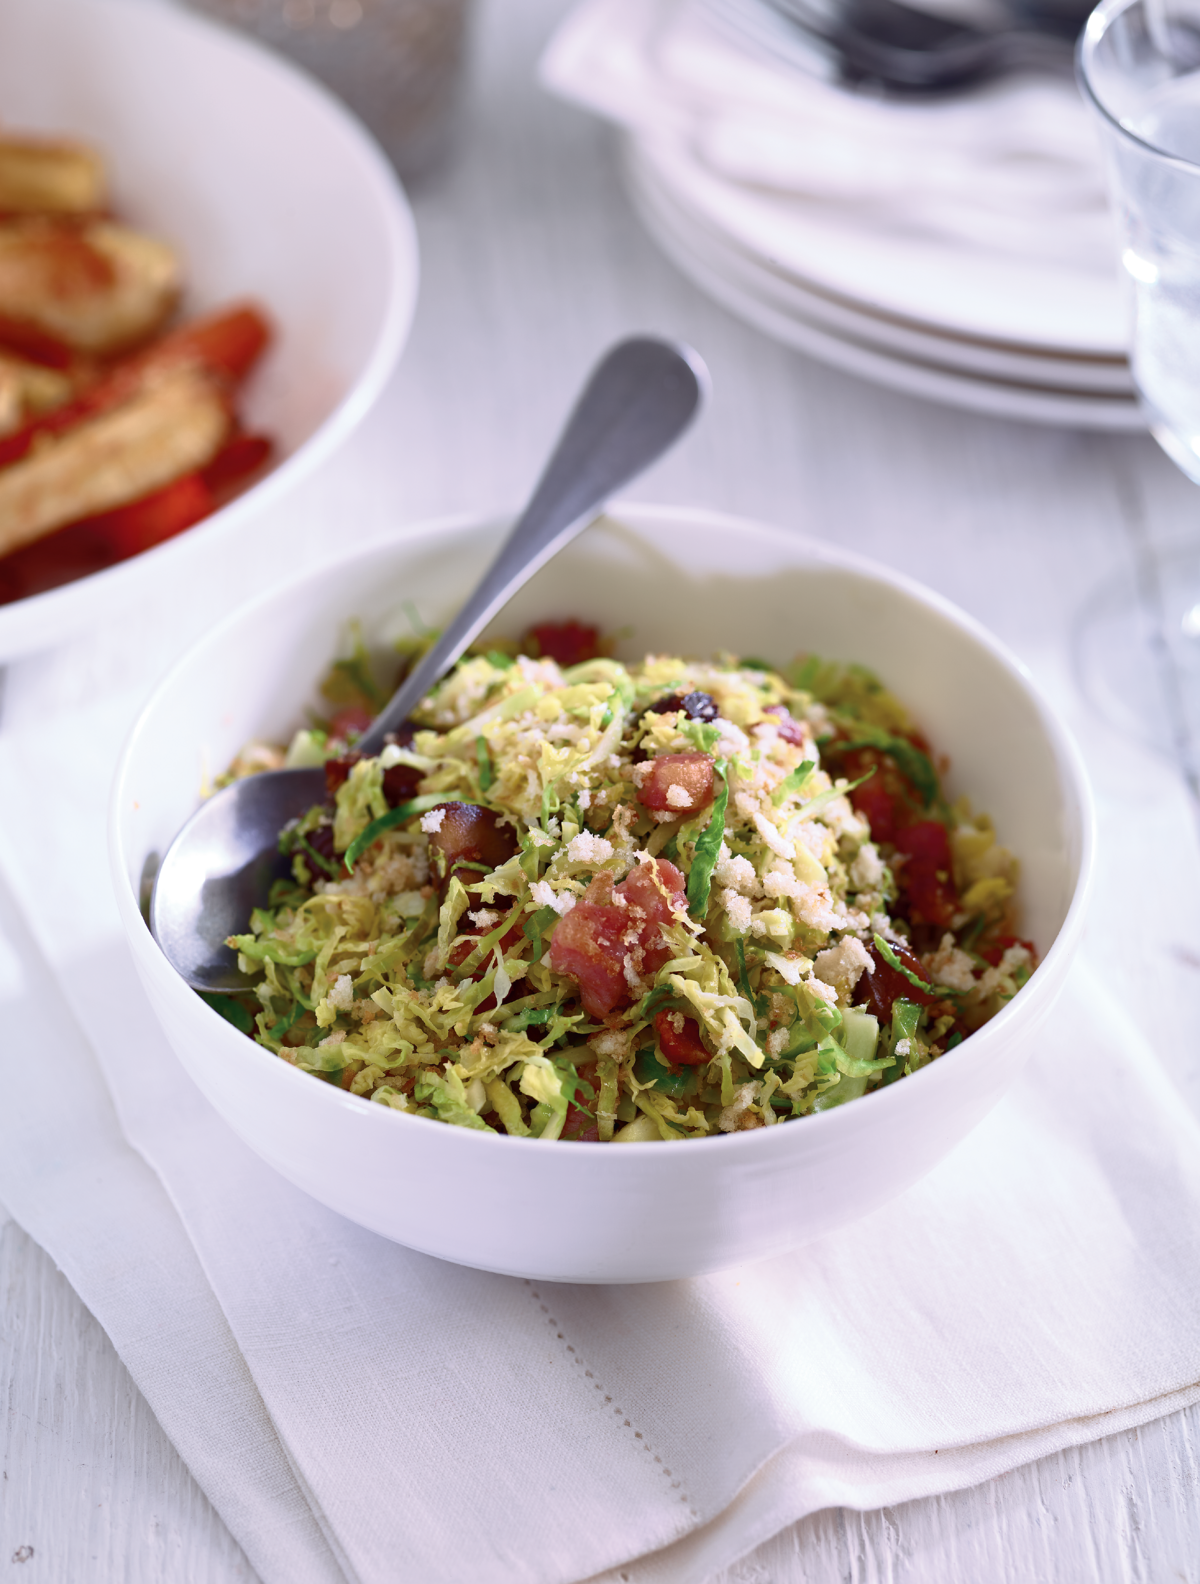 Shredded sprouts with chestnuts and bacon